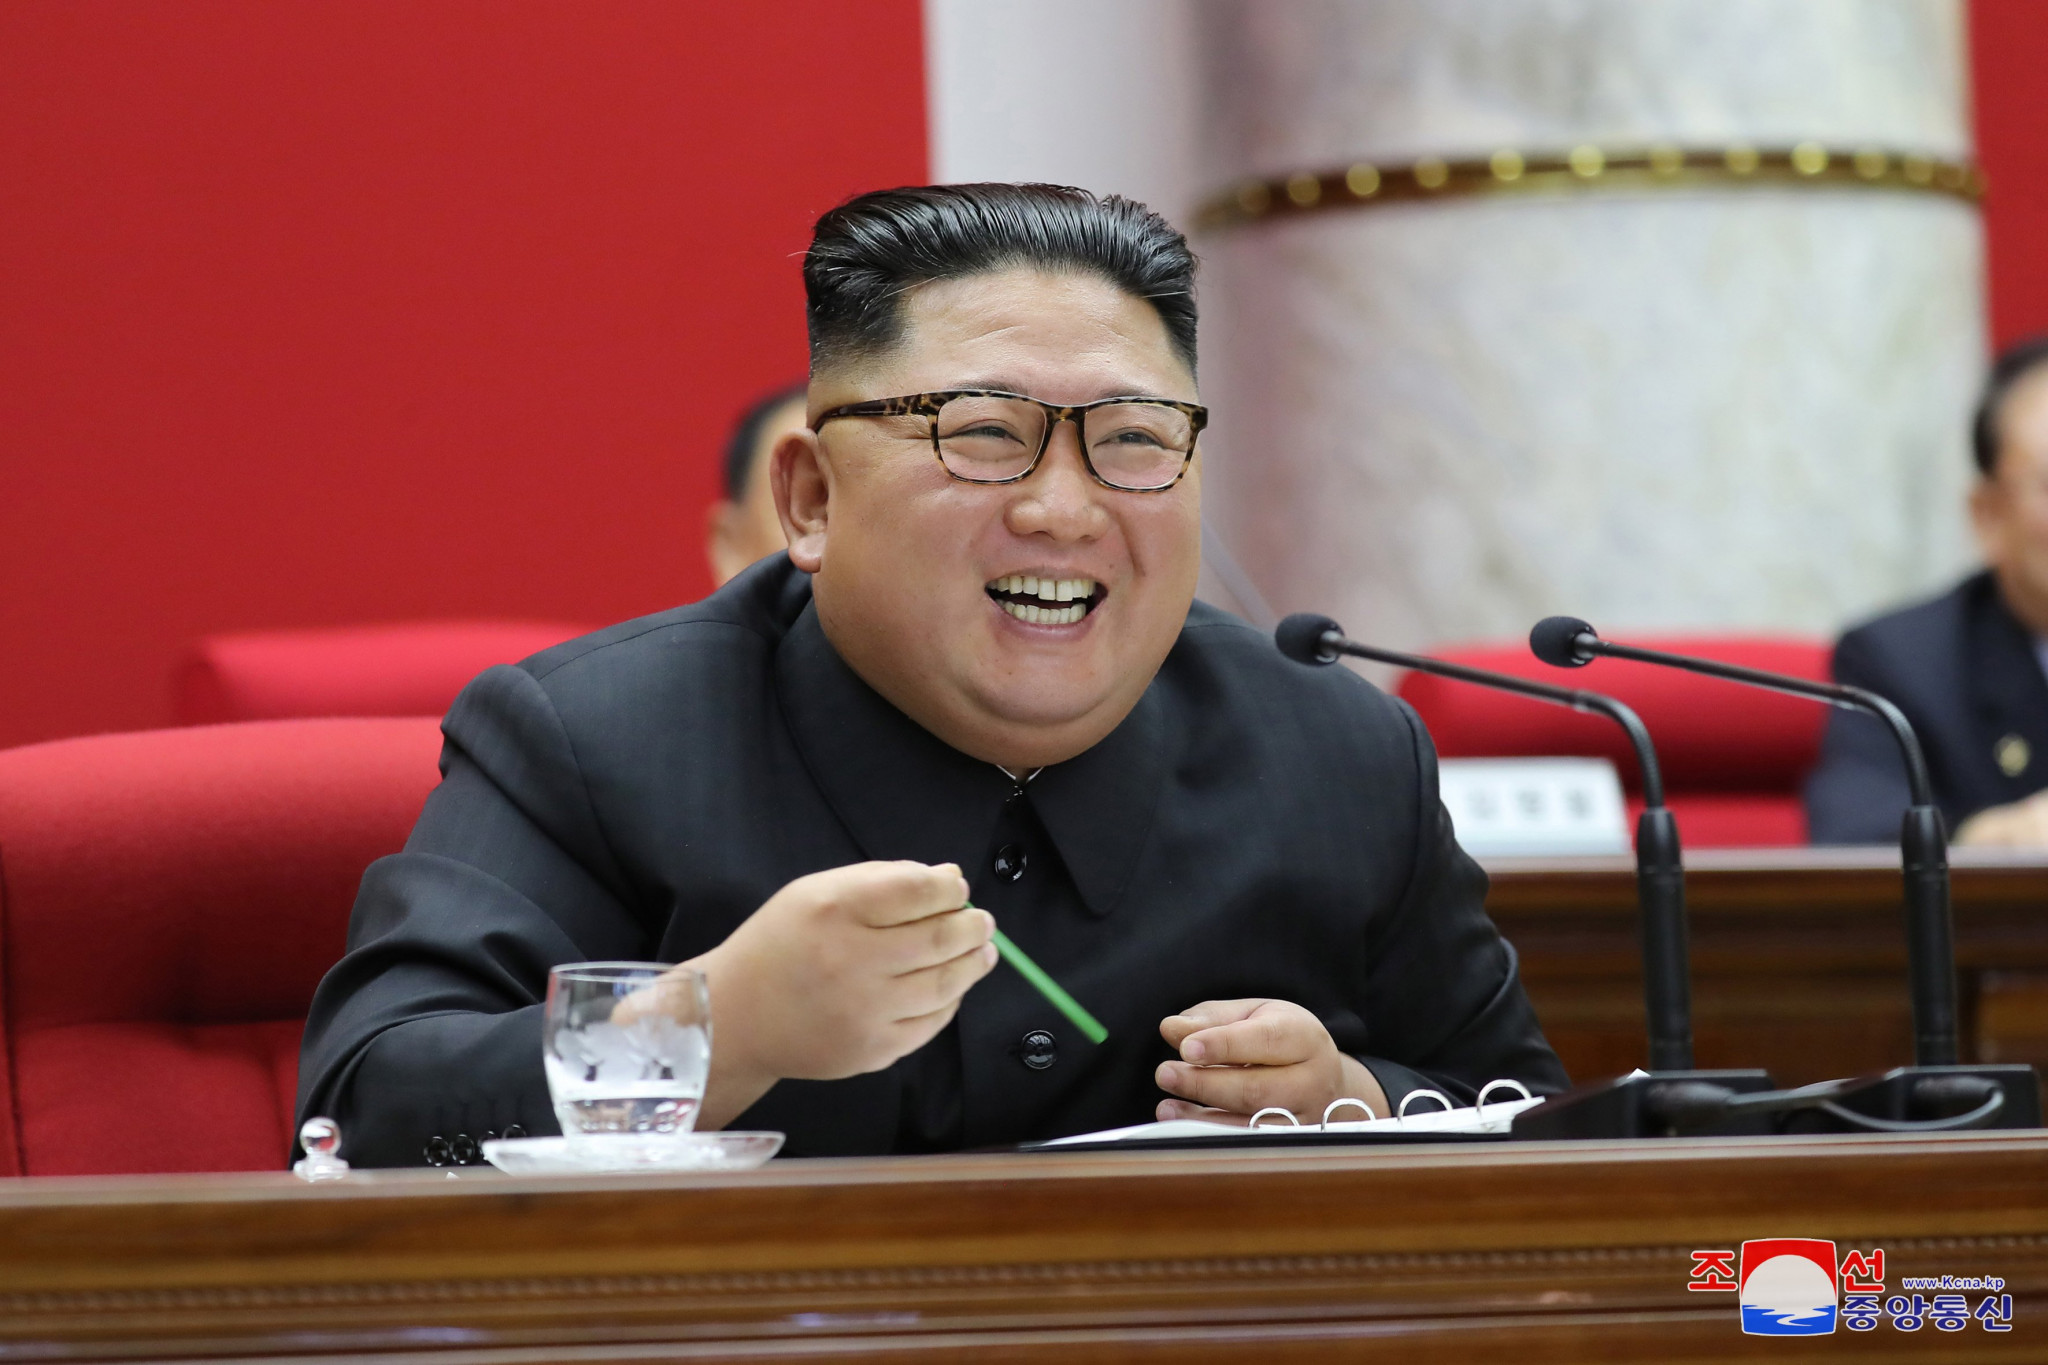 North Korea's chairman Kim Jong-un used his New Year's Day message to announce he planned to resume his country's nuclear programme and the launch of a “new strategic weapon” ©KCNA